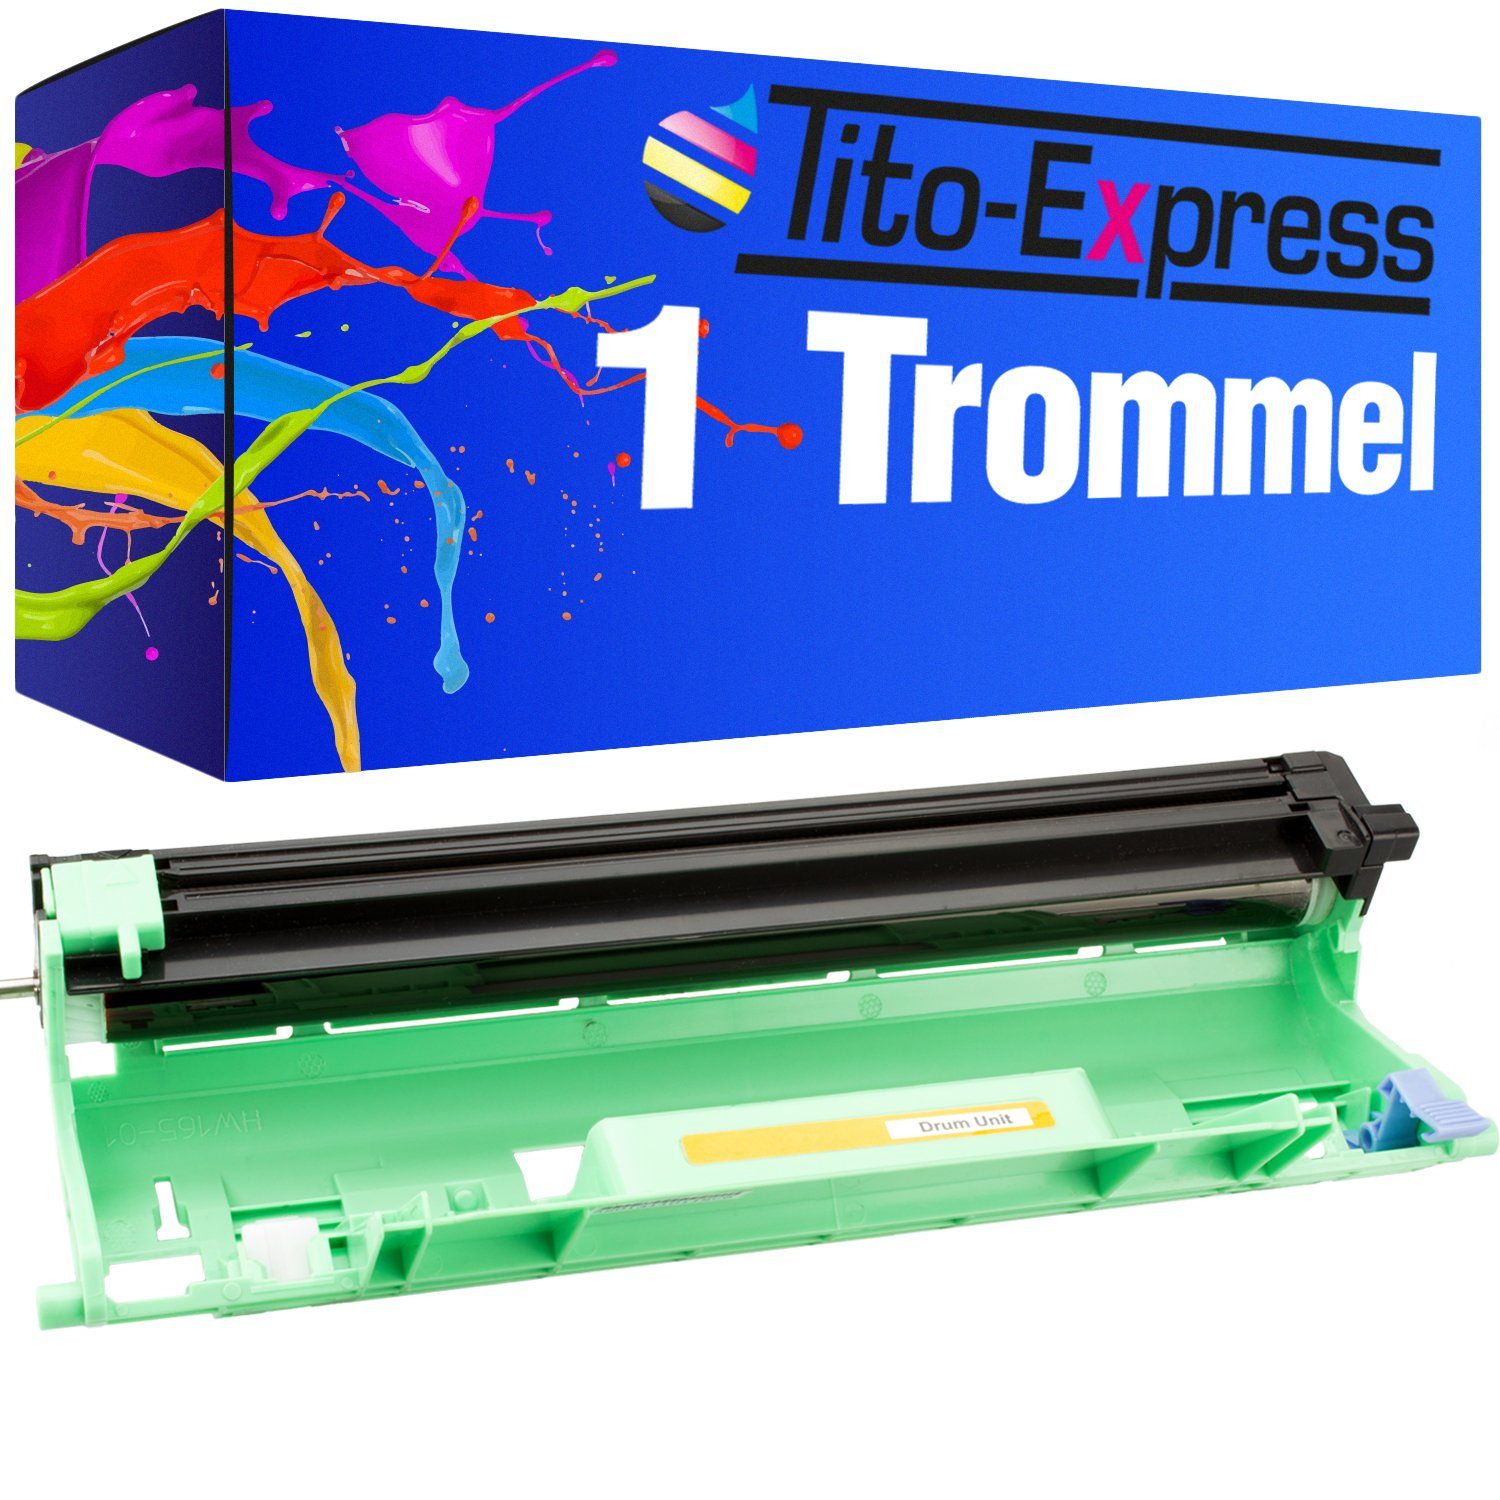 DR 1050 Trommel), DCP-1512 für DCP-1610W DR-1050 MFC-1810 BrotherDR1050, Brother DCP-1612W HL-1110 Tonerpatrone MFC-1910W DCP-1510 Trommel (1x Brother ersetzt Tito-Express